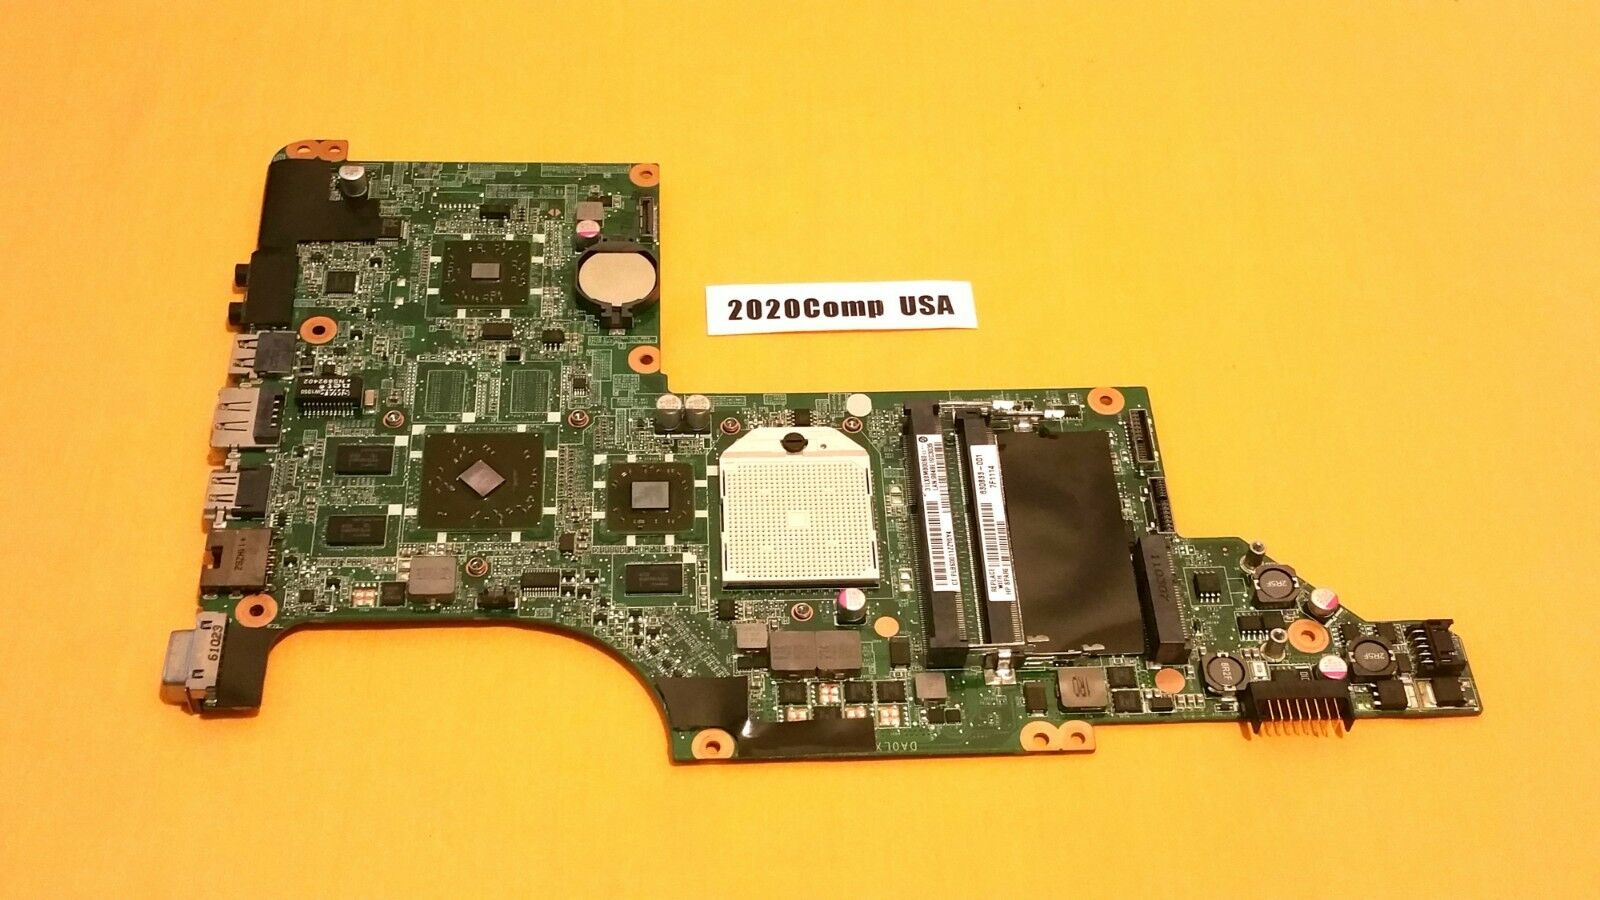 HP DV7 4000 Series 4263CL 4270US 4273US 4274NR Motherboard 630833-001 => TESTED Tracking Number is INCLUDED,